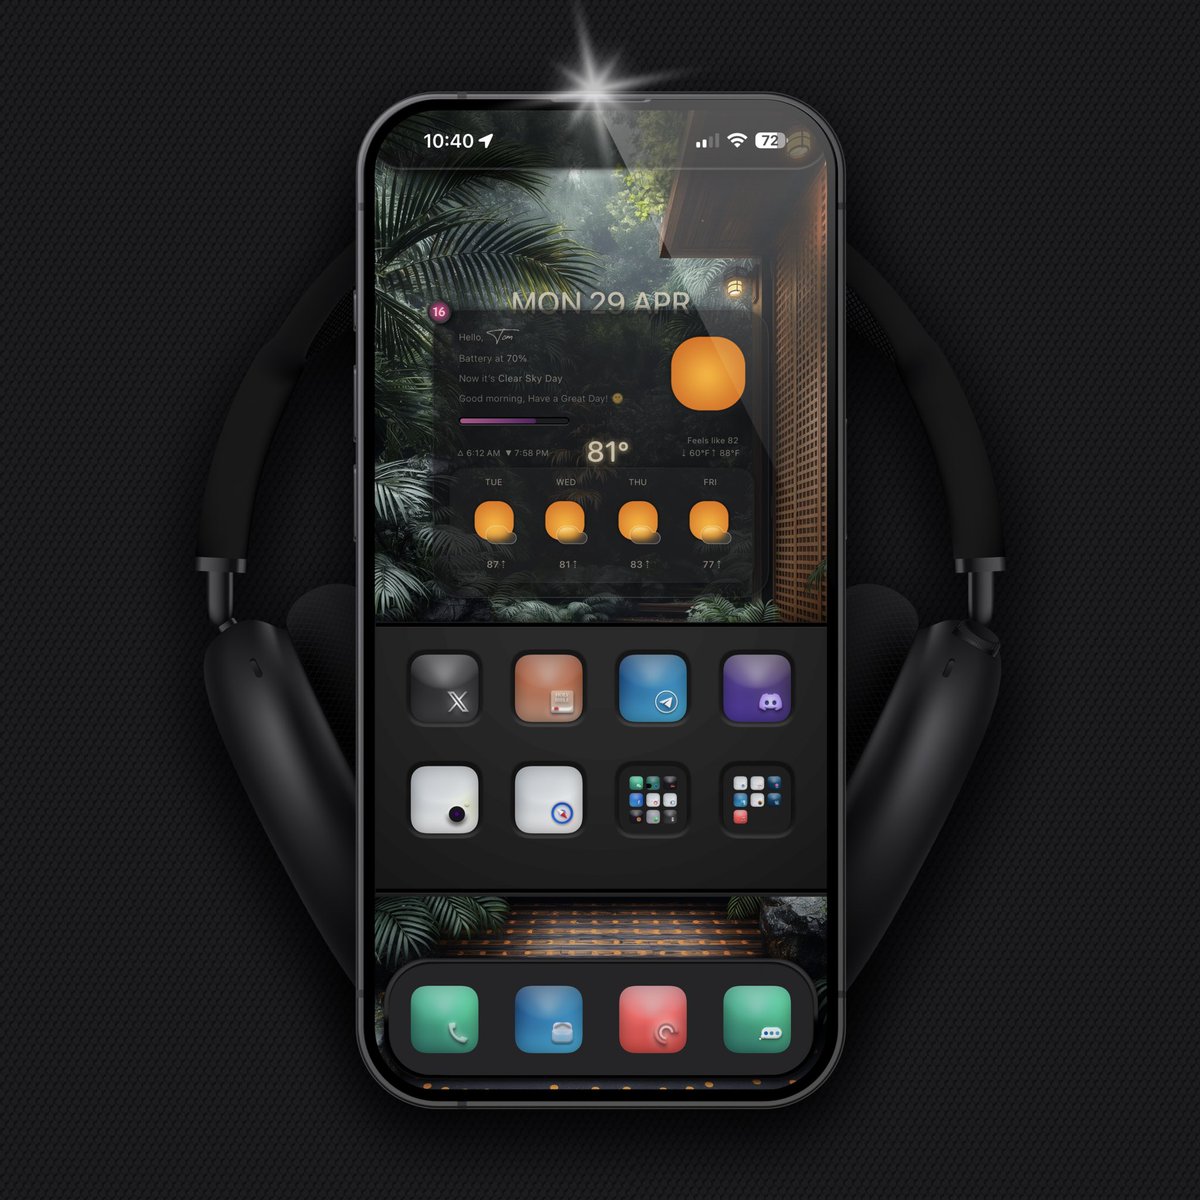 Check out #ElevationGradR by @Enter_Apps 👉🏼 ko-fi.com/s/5c800f8a94 Use Ⓜ️ by @SeanKly for custom walls 👉🏼 apple.co/3Q5ajT9 #Apple #iOS1741 #iPhone15PM #TeamNatty #NoJailBreak #Widgy #MockupM #ShowAE @SeanKly @TeboulDavid1 @enter_apps @kyawthihaphyo @Attairdu57slm